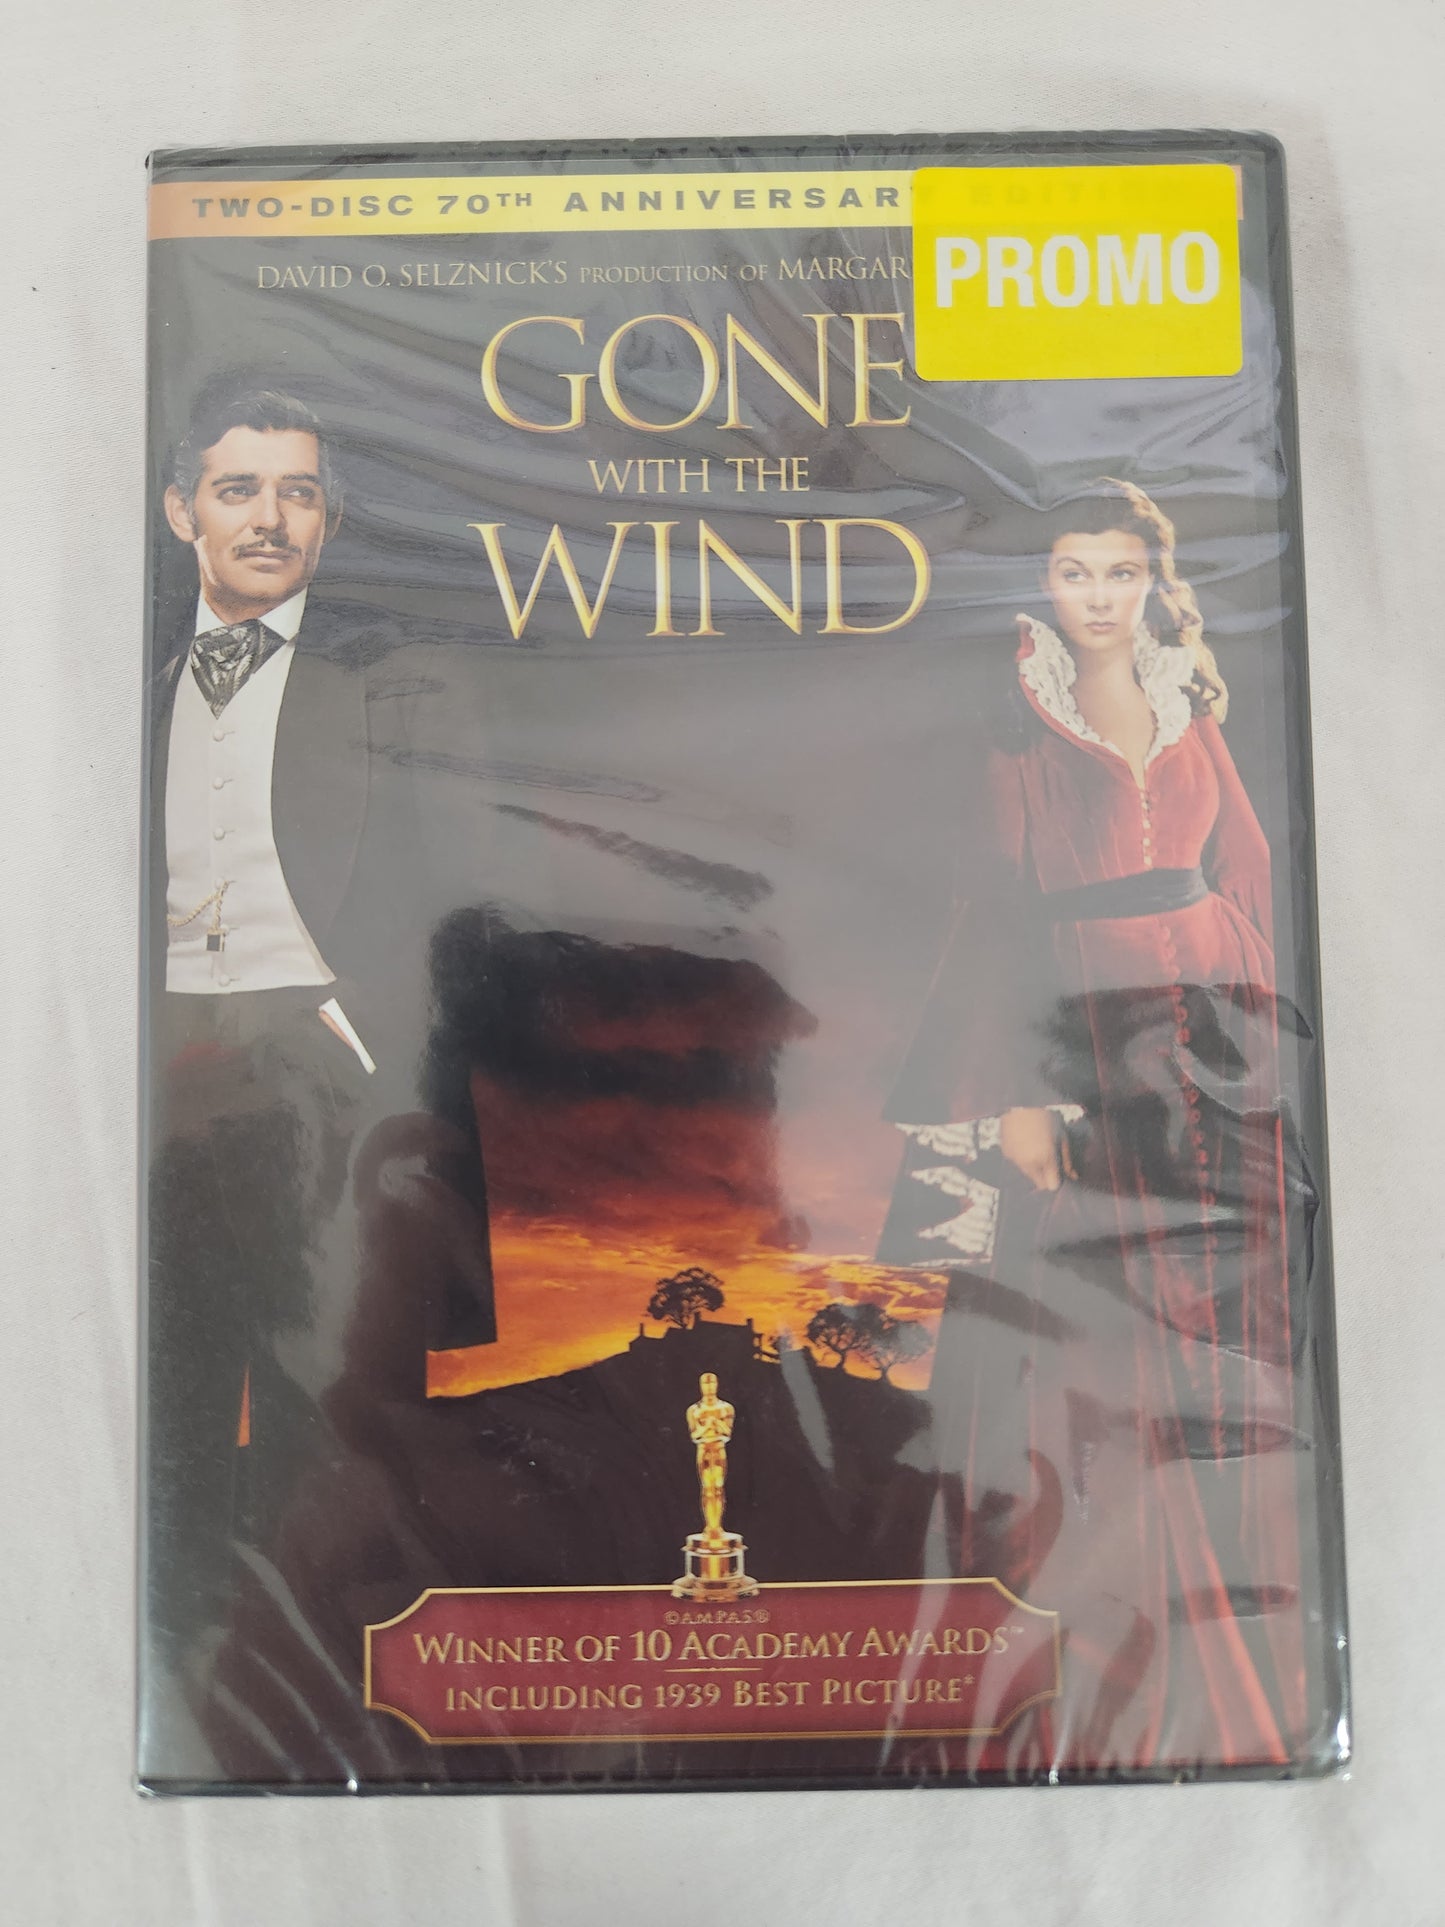 Gone with the Wind 2-Disc 70th Anniversary Edition DVD